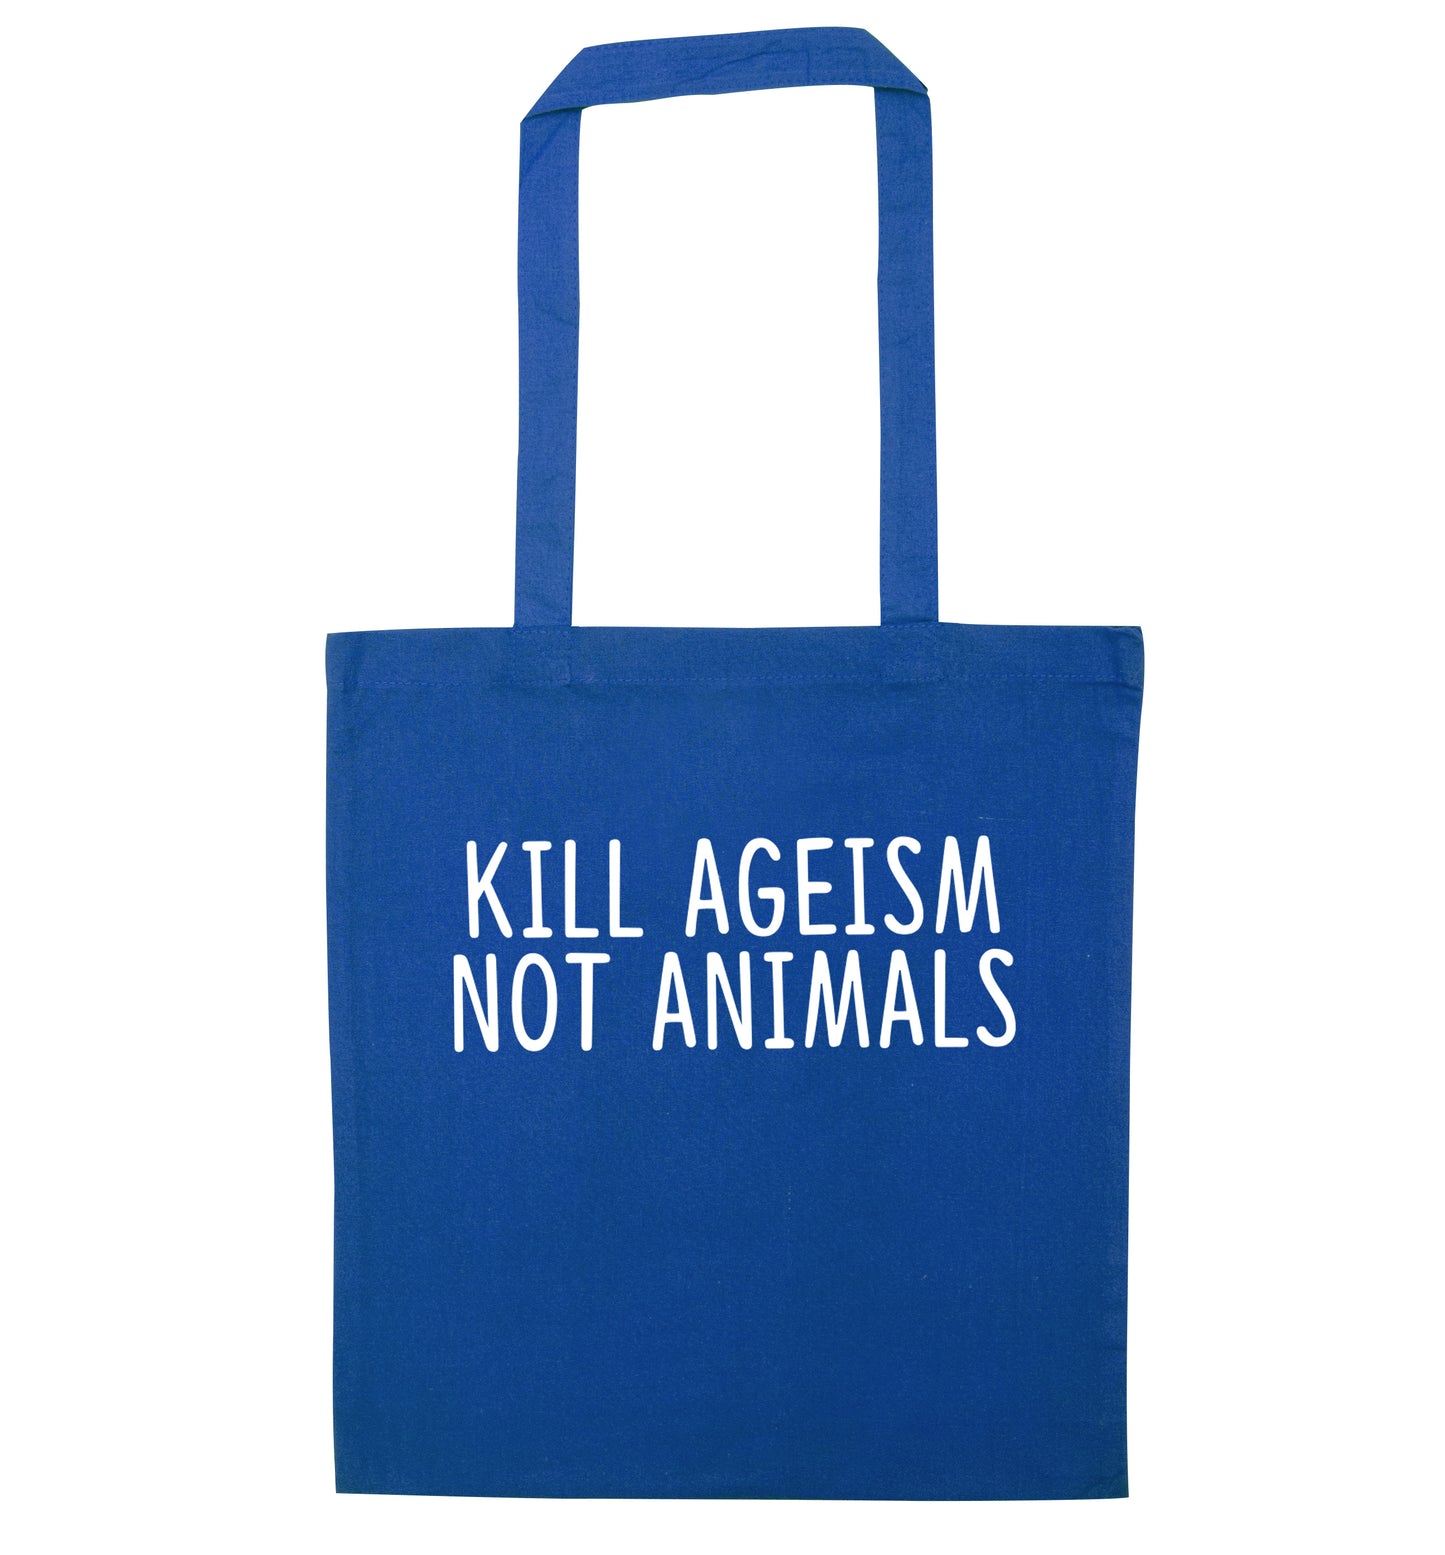 Kill Ageism Not Animals blue tote bag